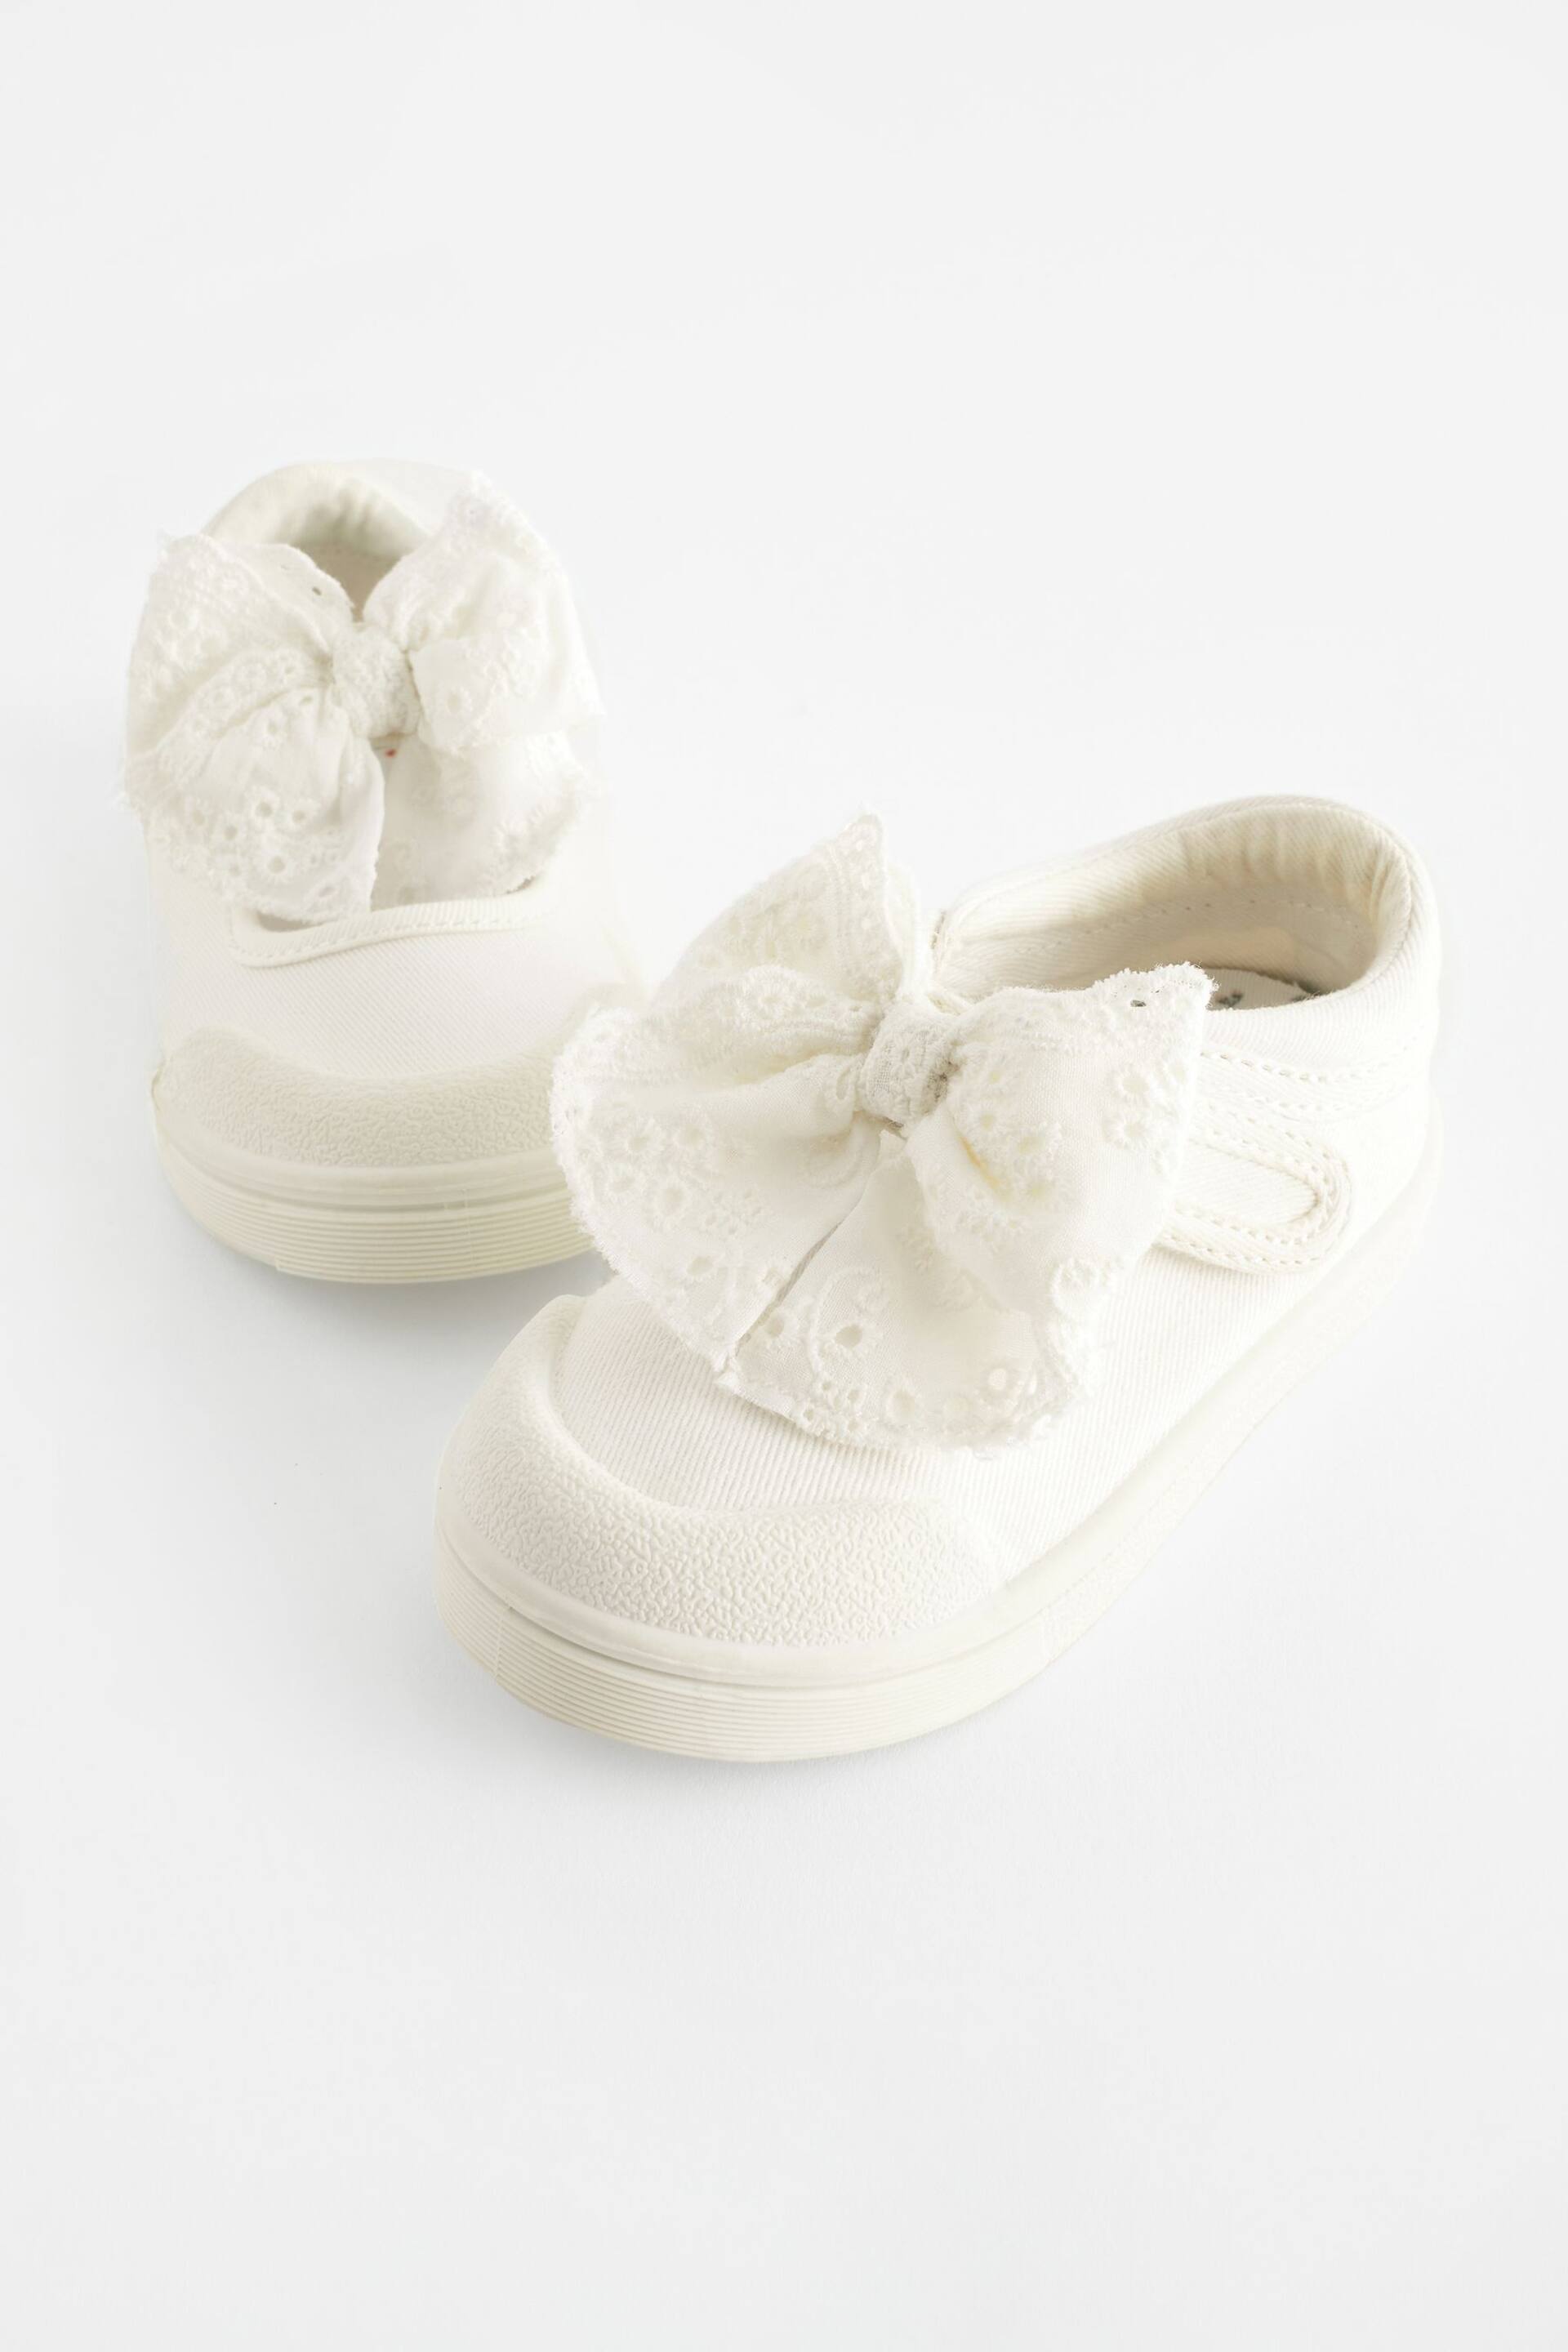 White Wide Fit (G) Machine Washable Mary Jane Shoes - Image 4 of 6